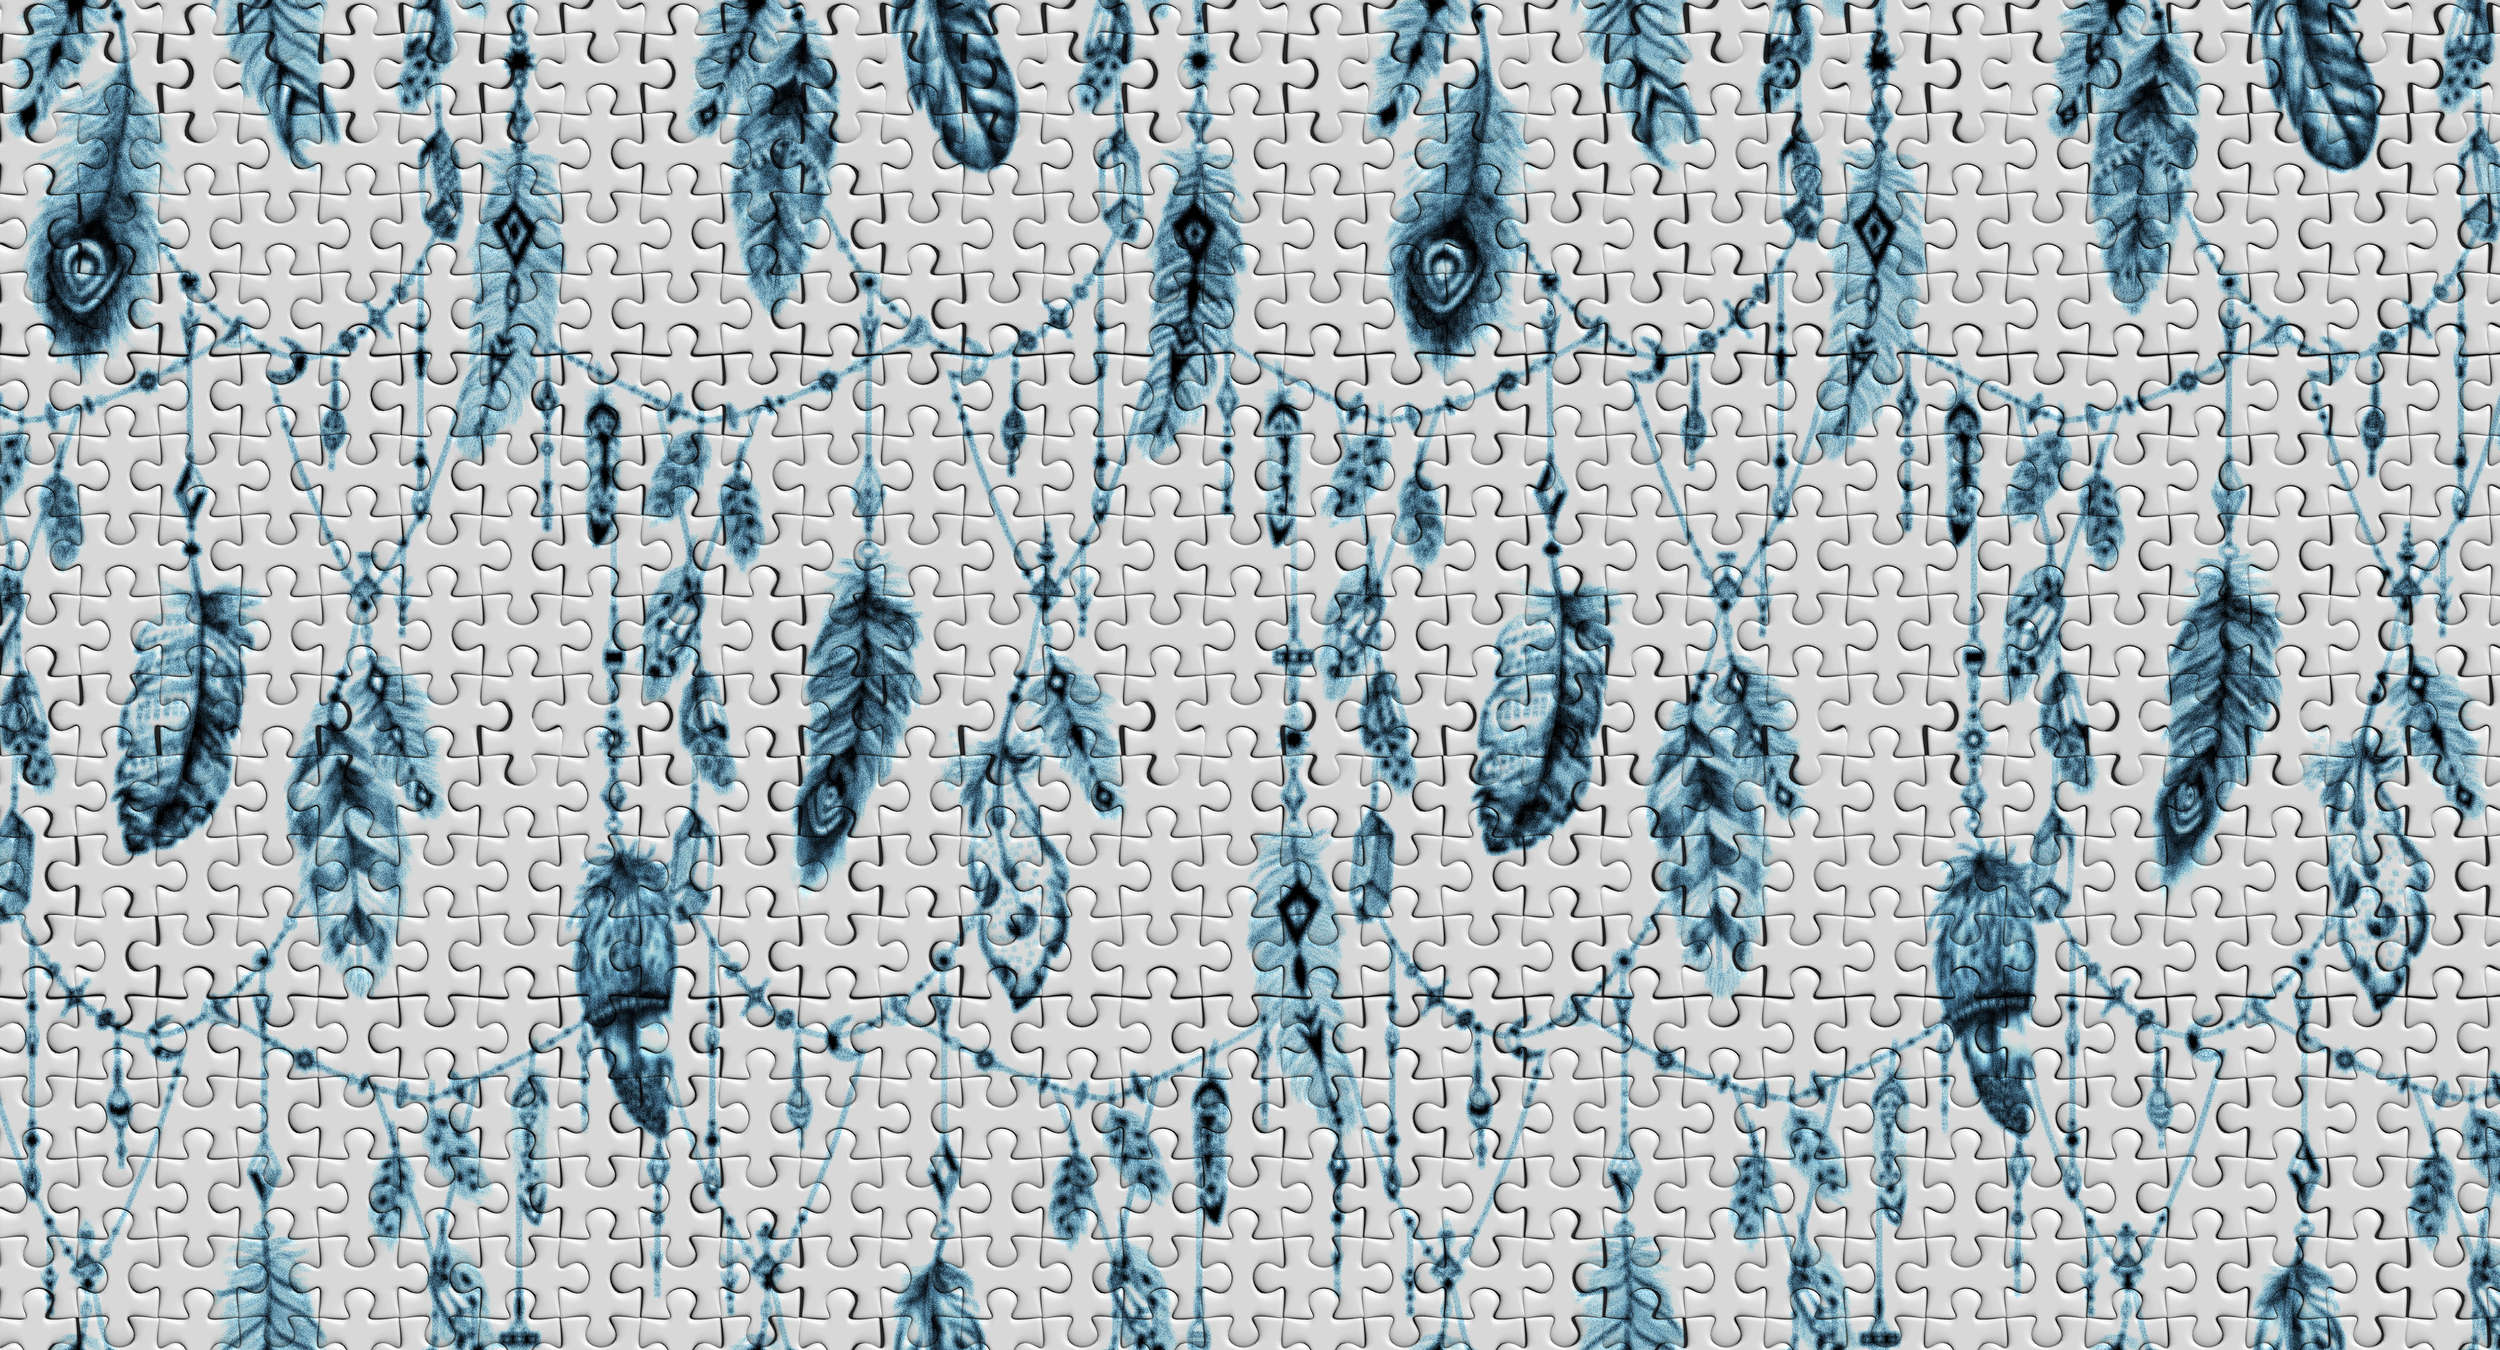             Boho style puzzle mural with feather motif - blue, grey, white
        